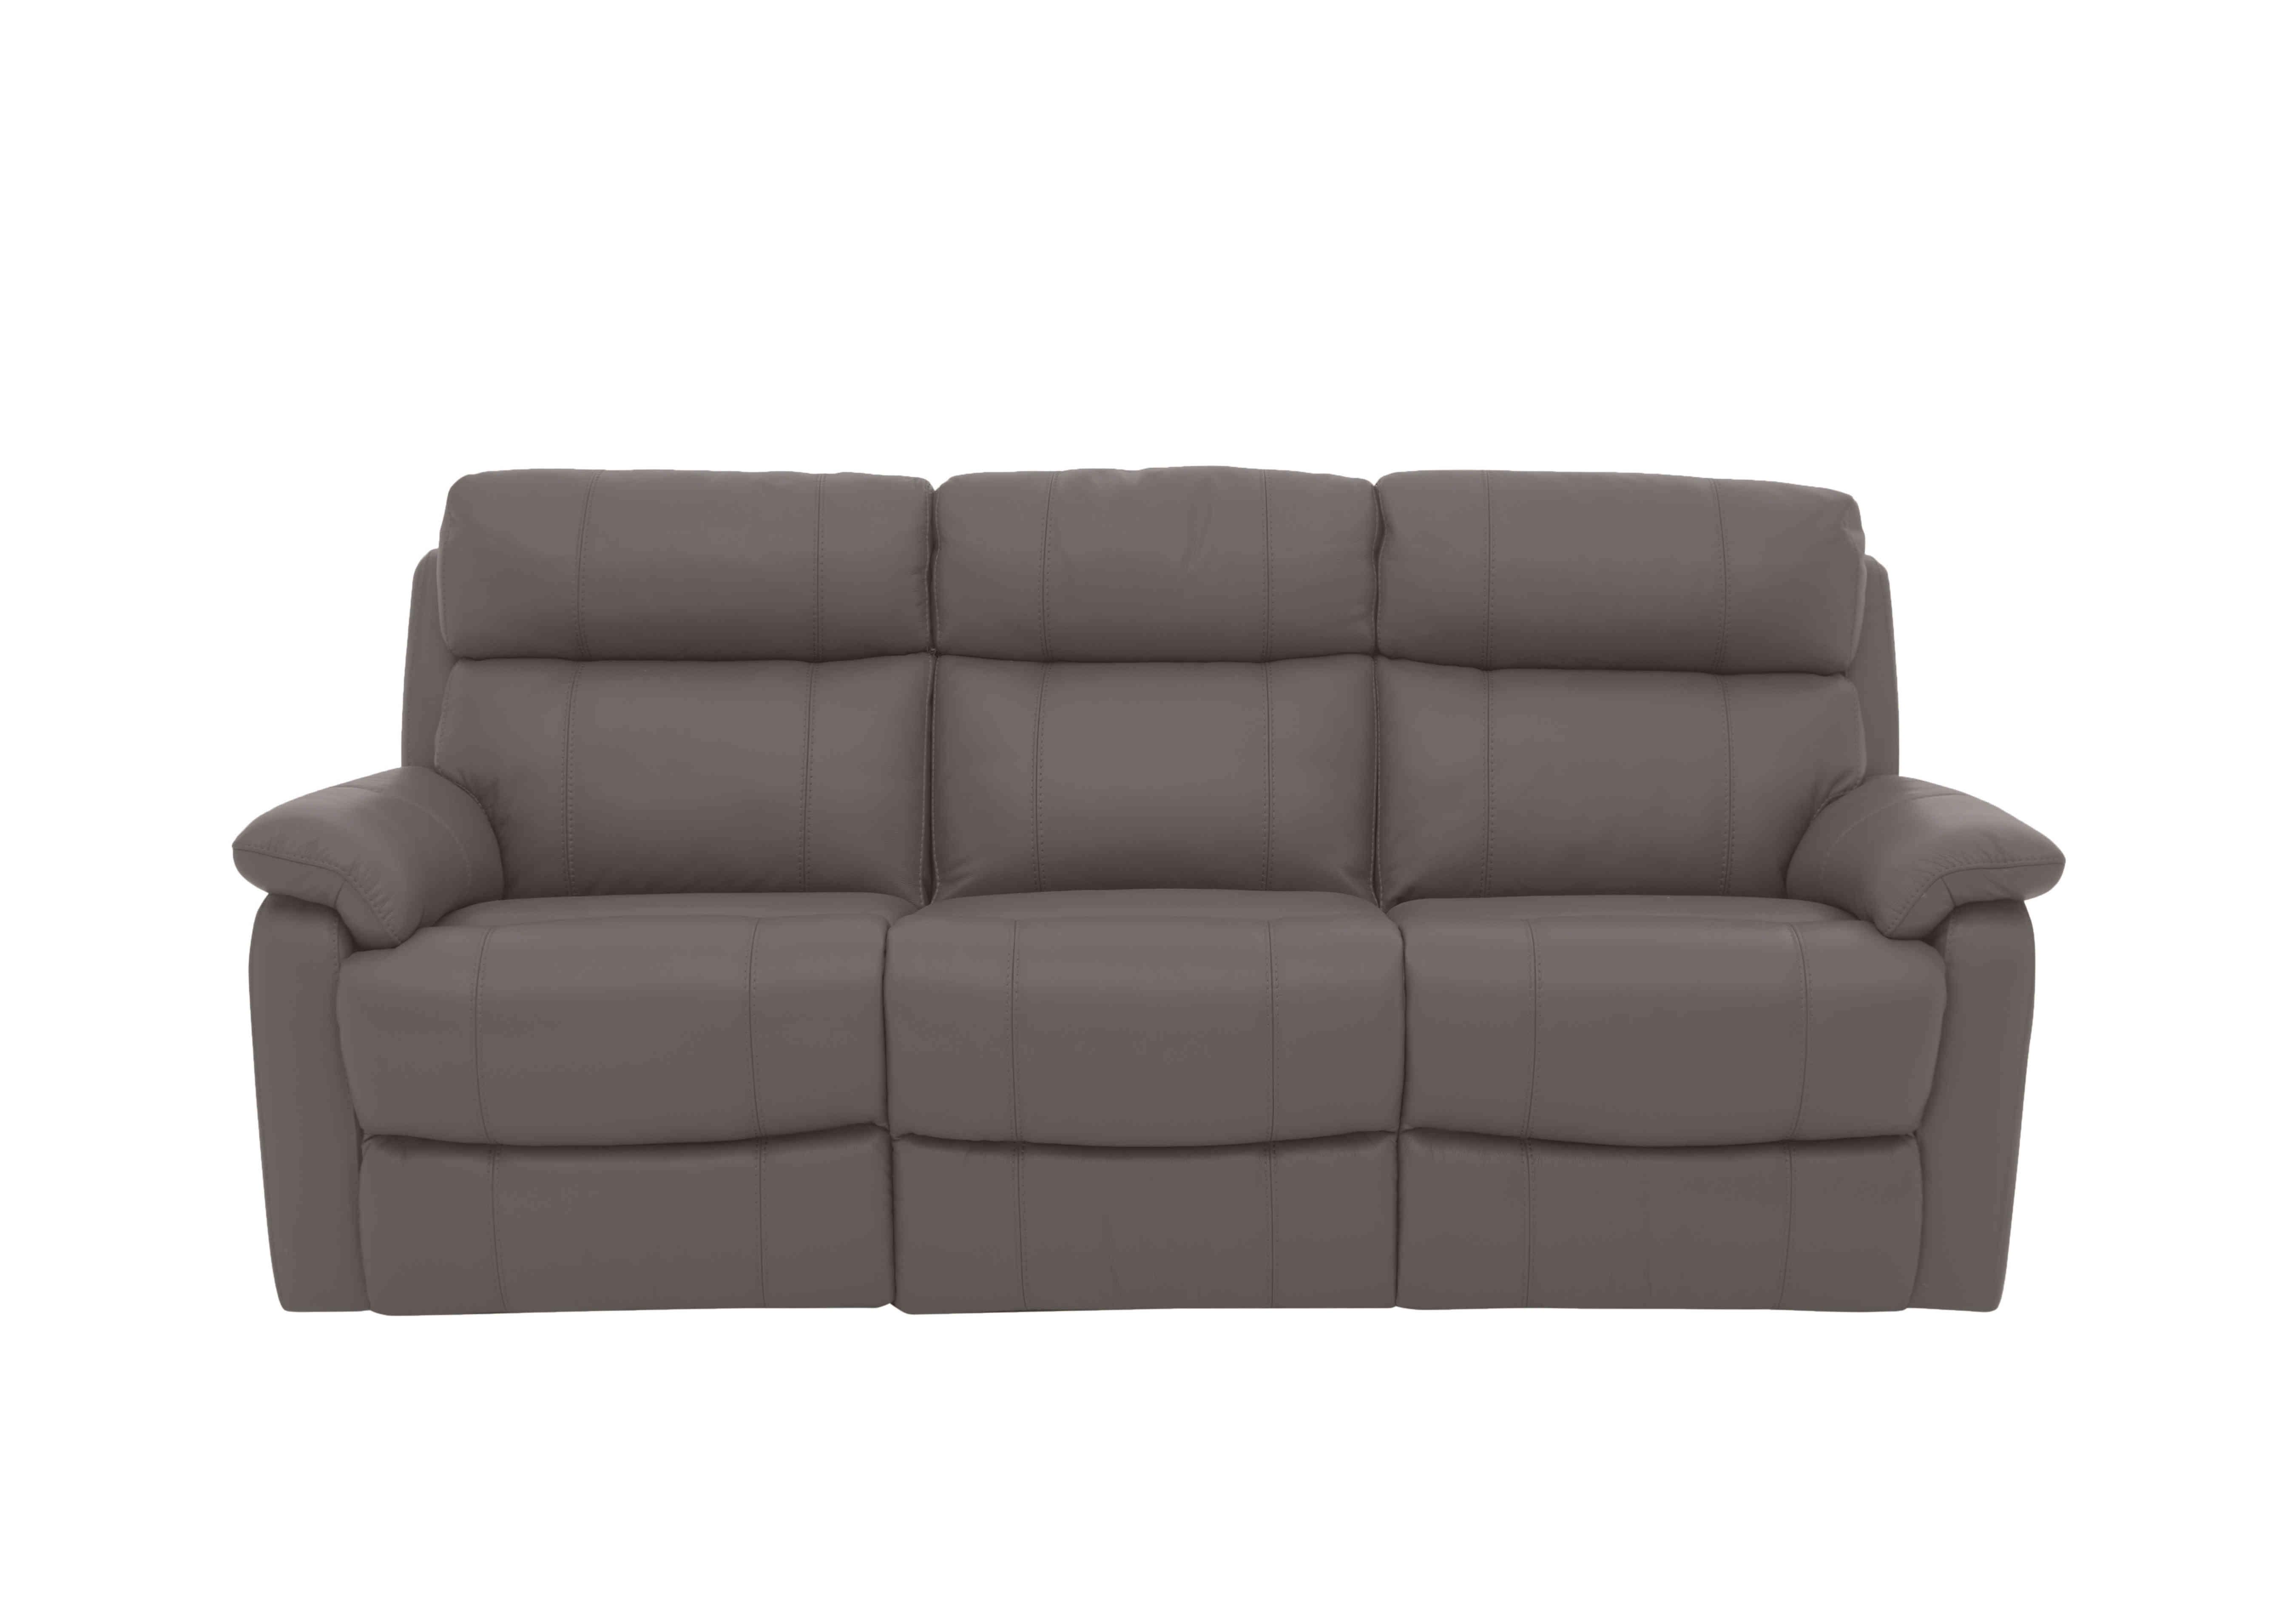 Relax Station Komodo 3 Seater Leather Sofa with Power Headrests and Cup Holders in Nc-042e Elephant on Furniture Village